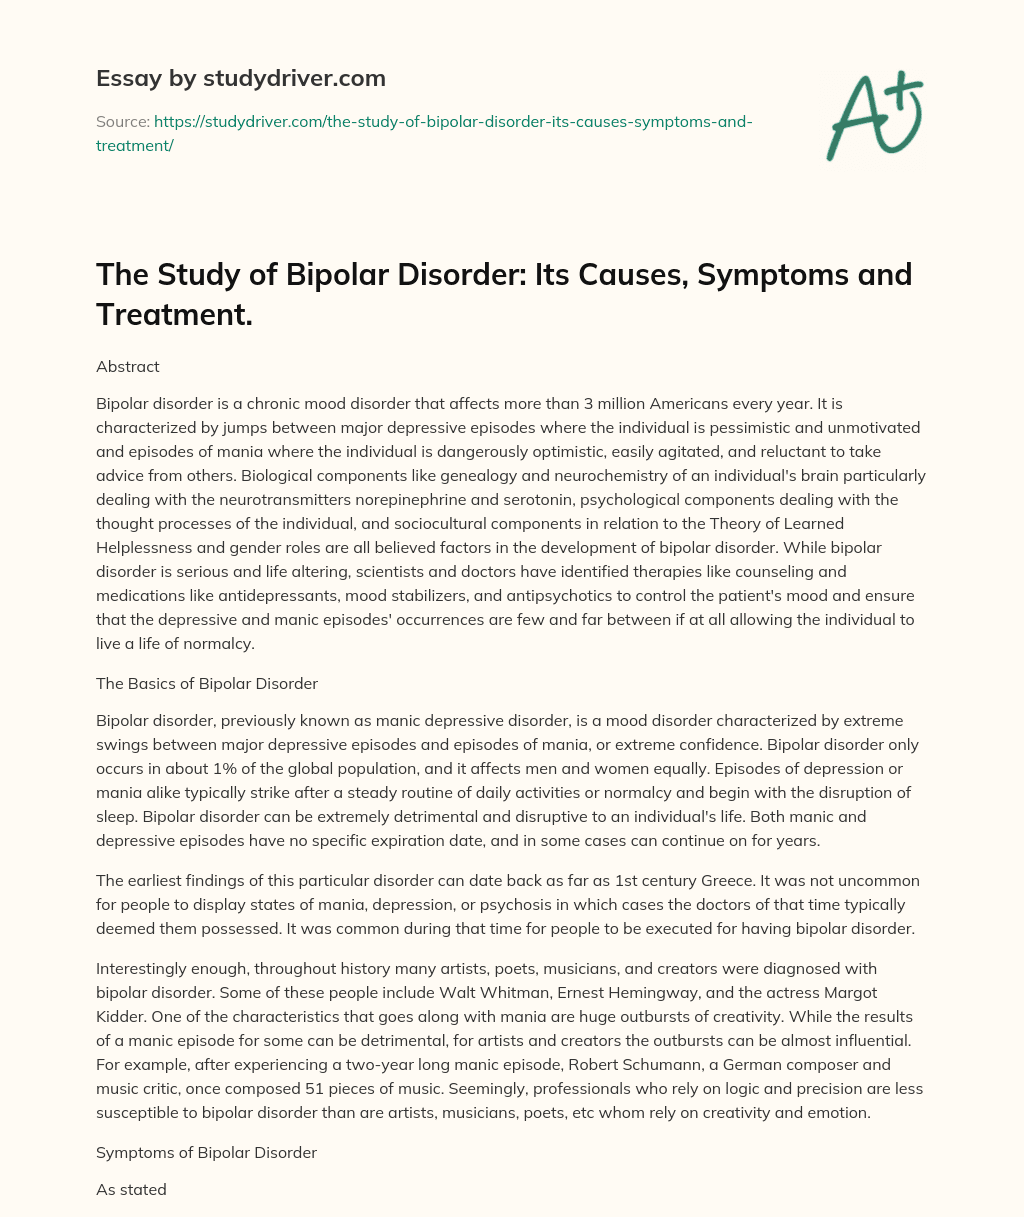 The Study of Bipolar Disorder: its Causes, Symptoms and Treatment. essay